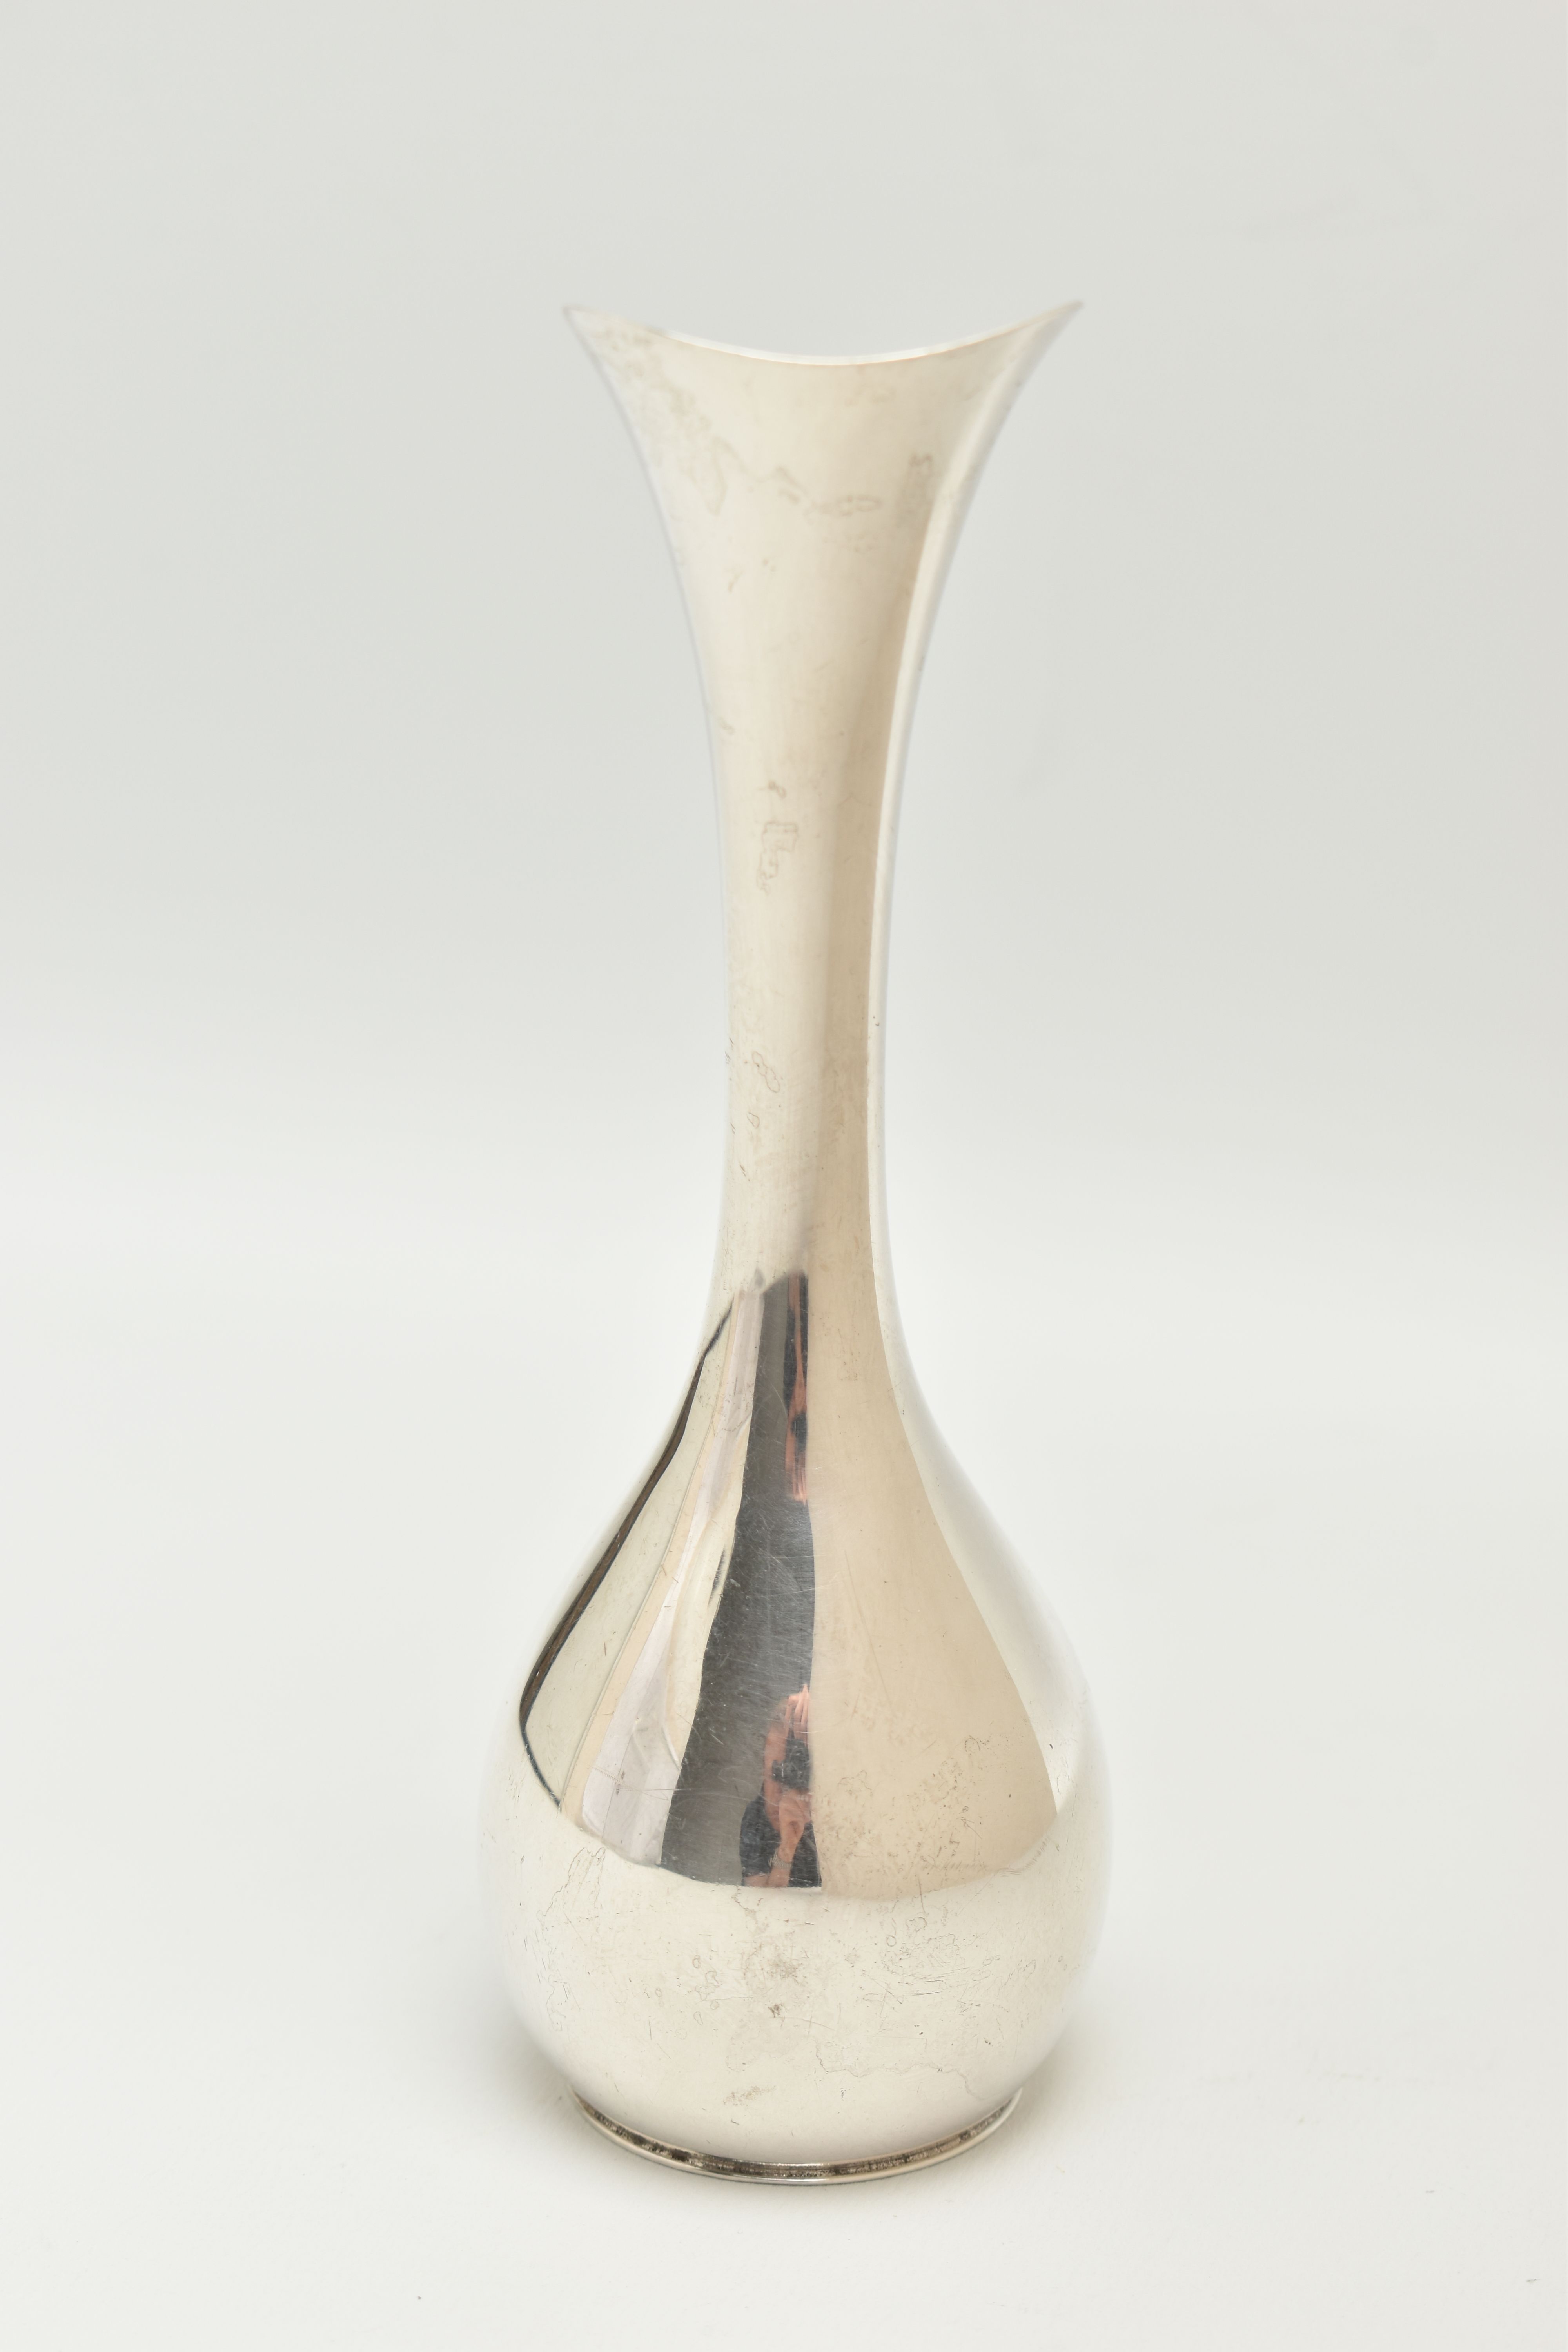 A LATE 20TH CENTURY DANISH SILVER PLATED BUD VASE IN THE FORM OF A JUG, sinuous strap handle, - Image 4 of 6